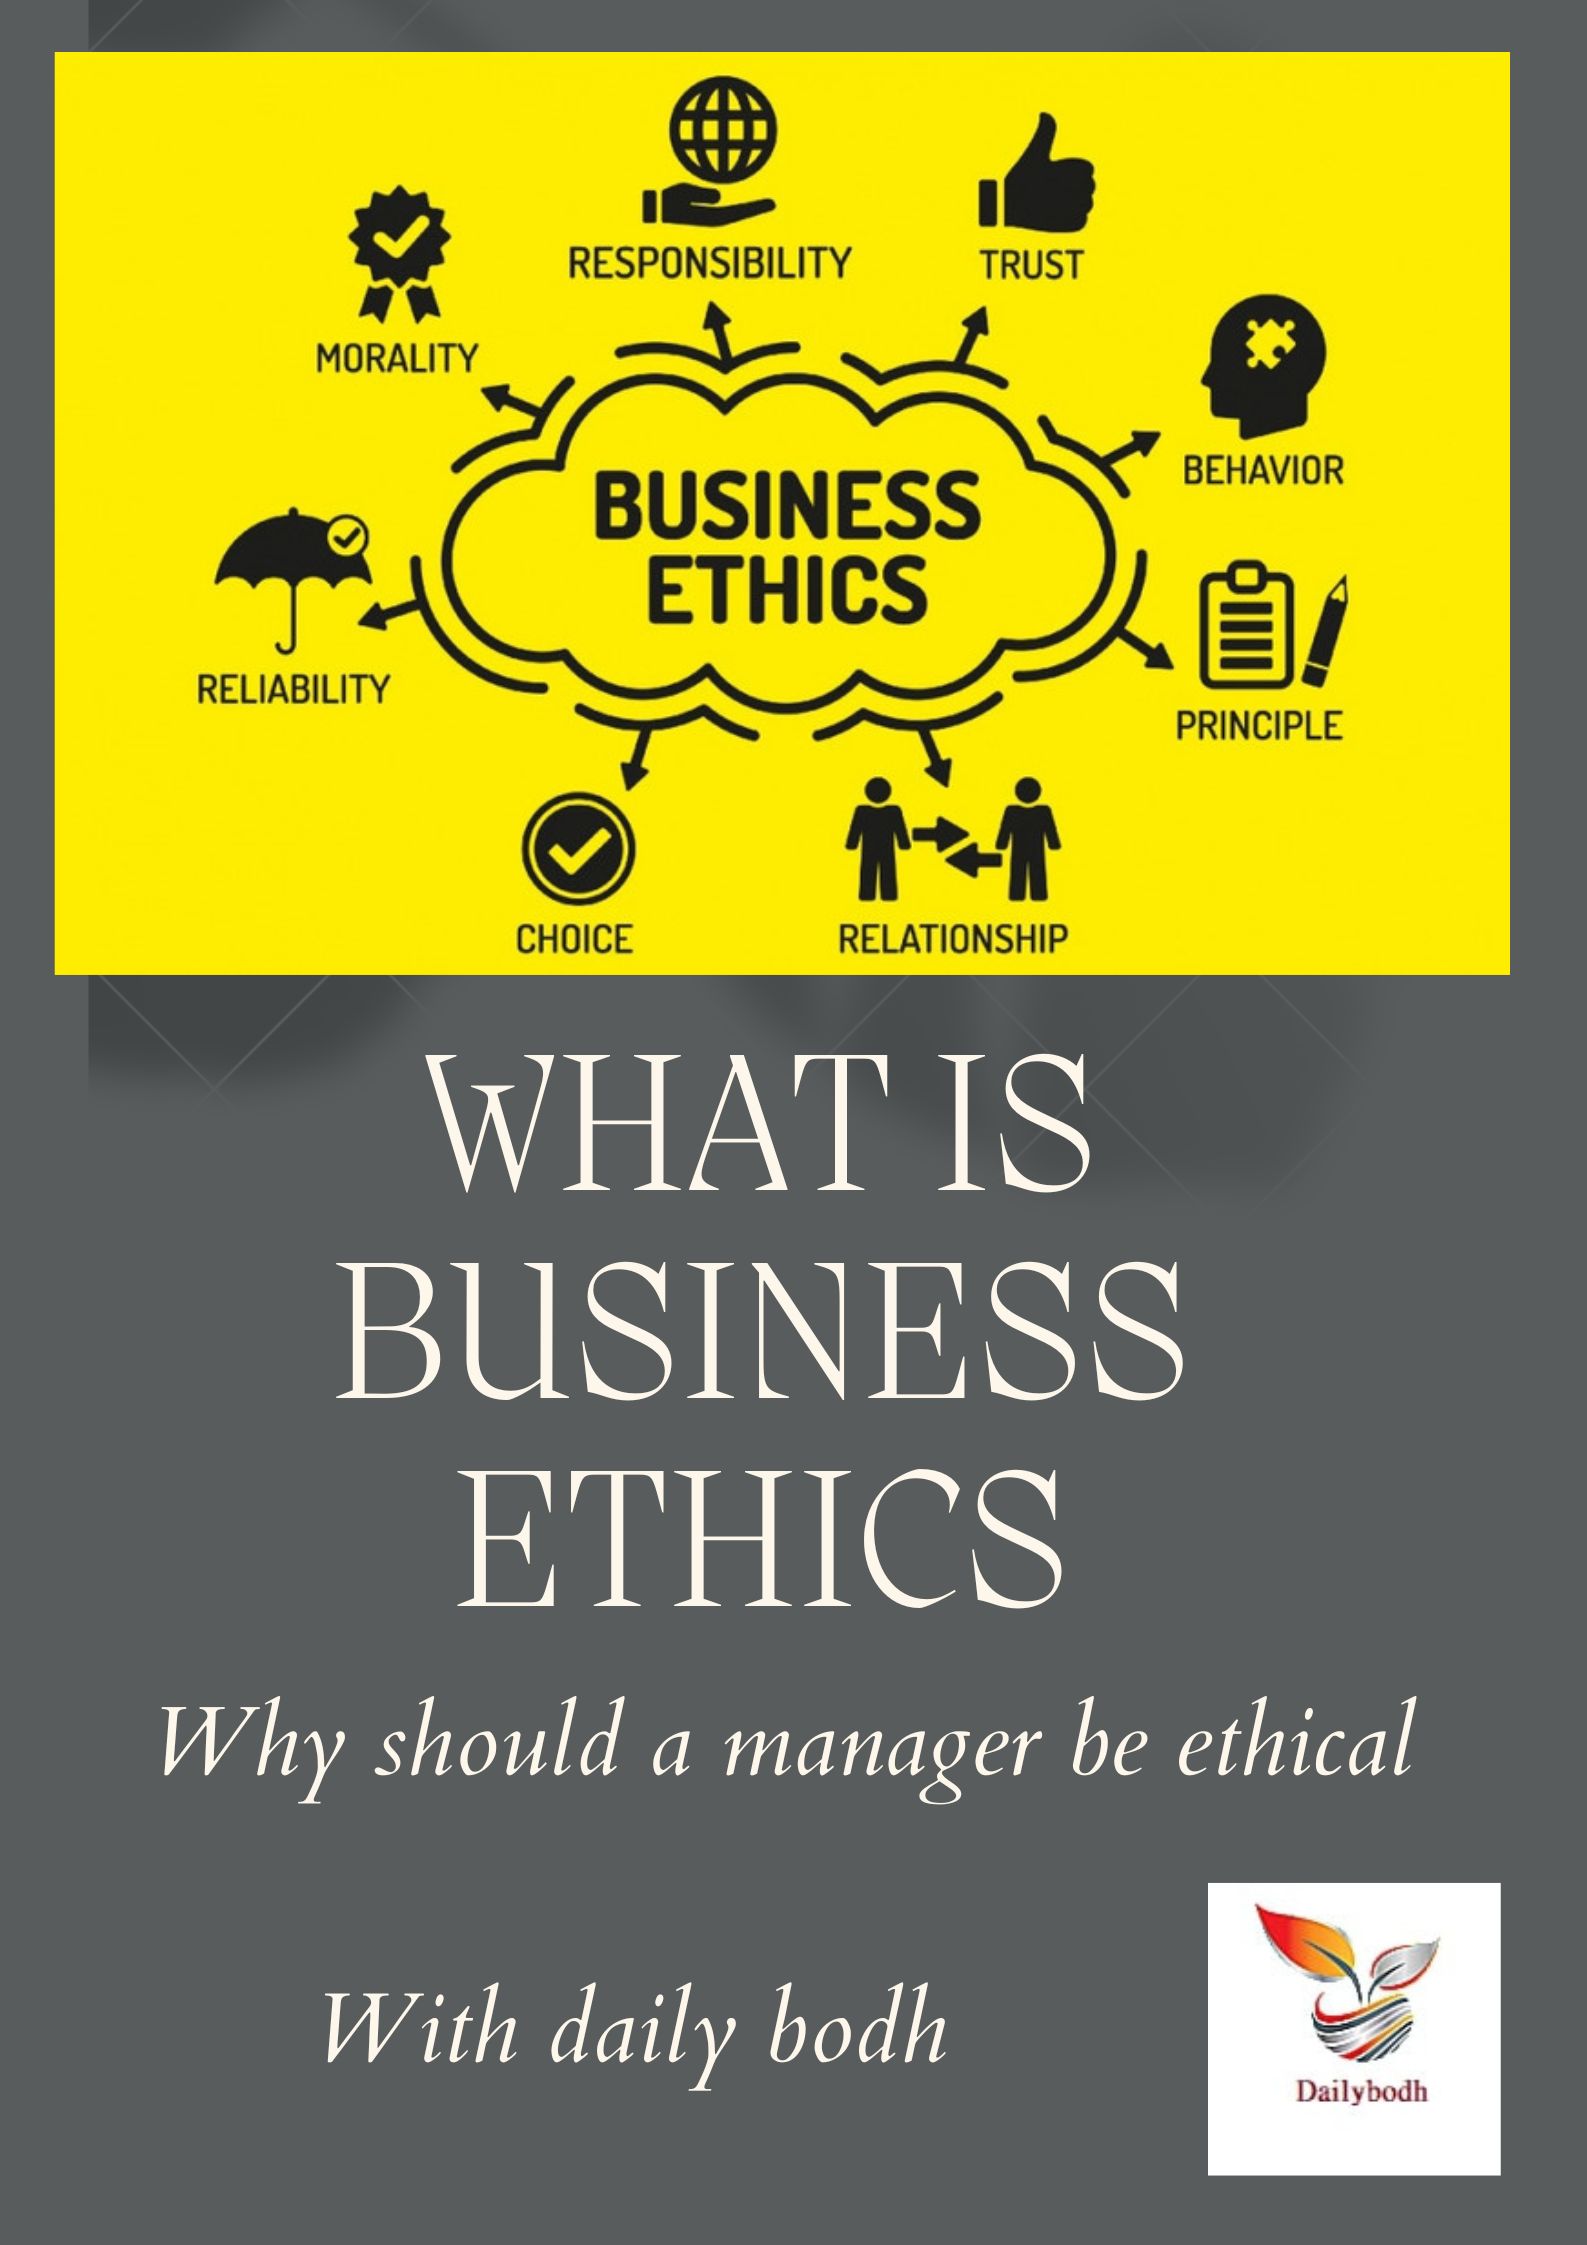 Why should a manager be ethical